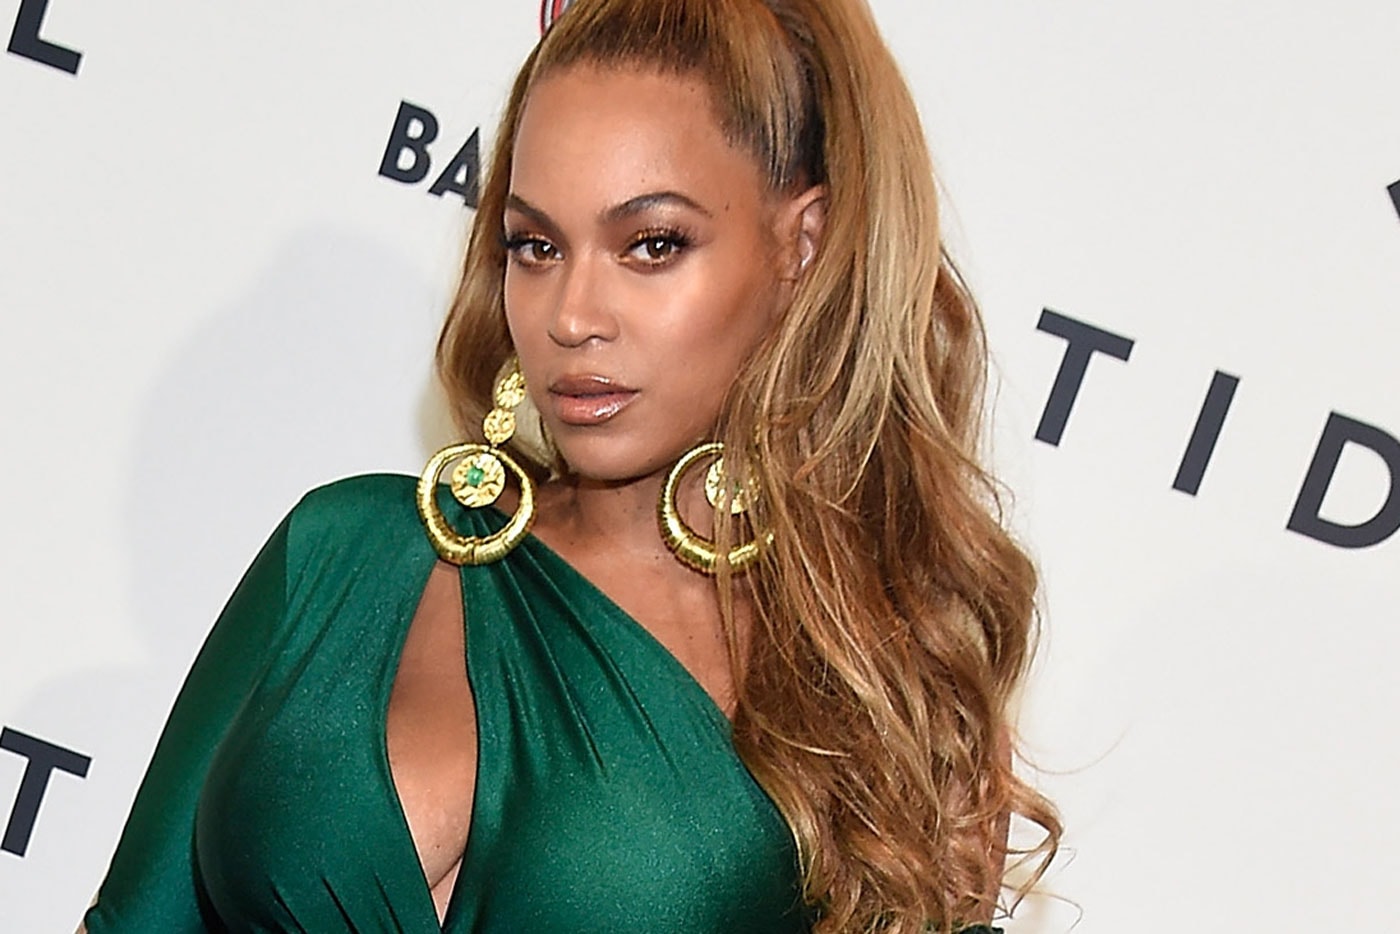 Beyoncé Reveals Her Pizza Preferences in New Cover Story Interview